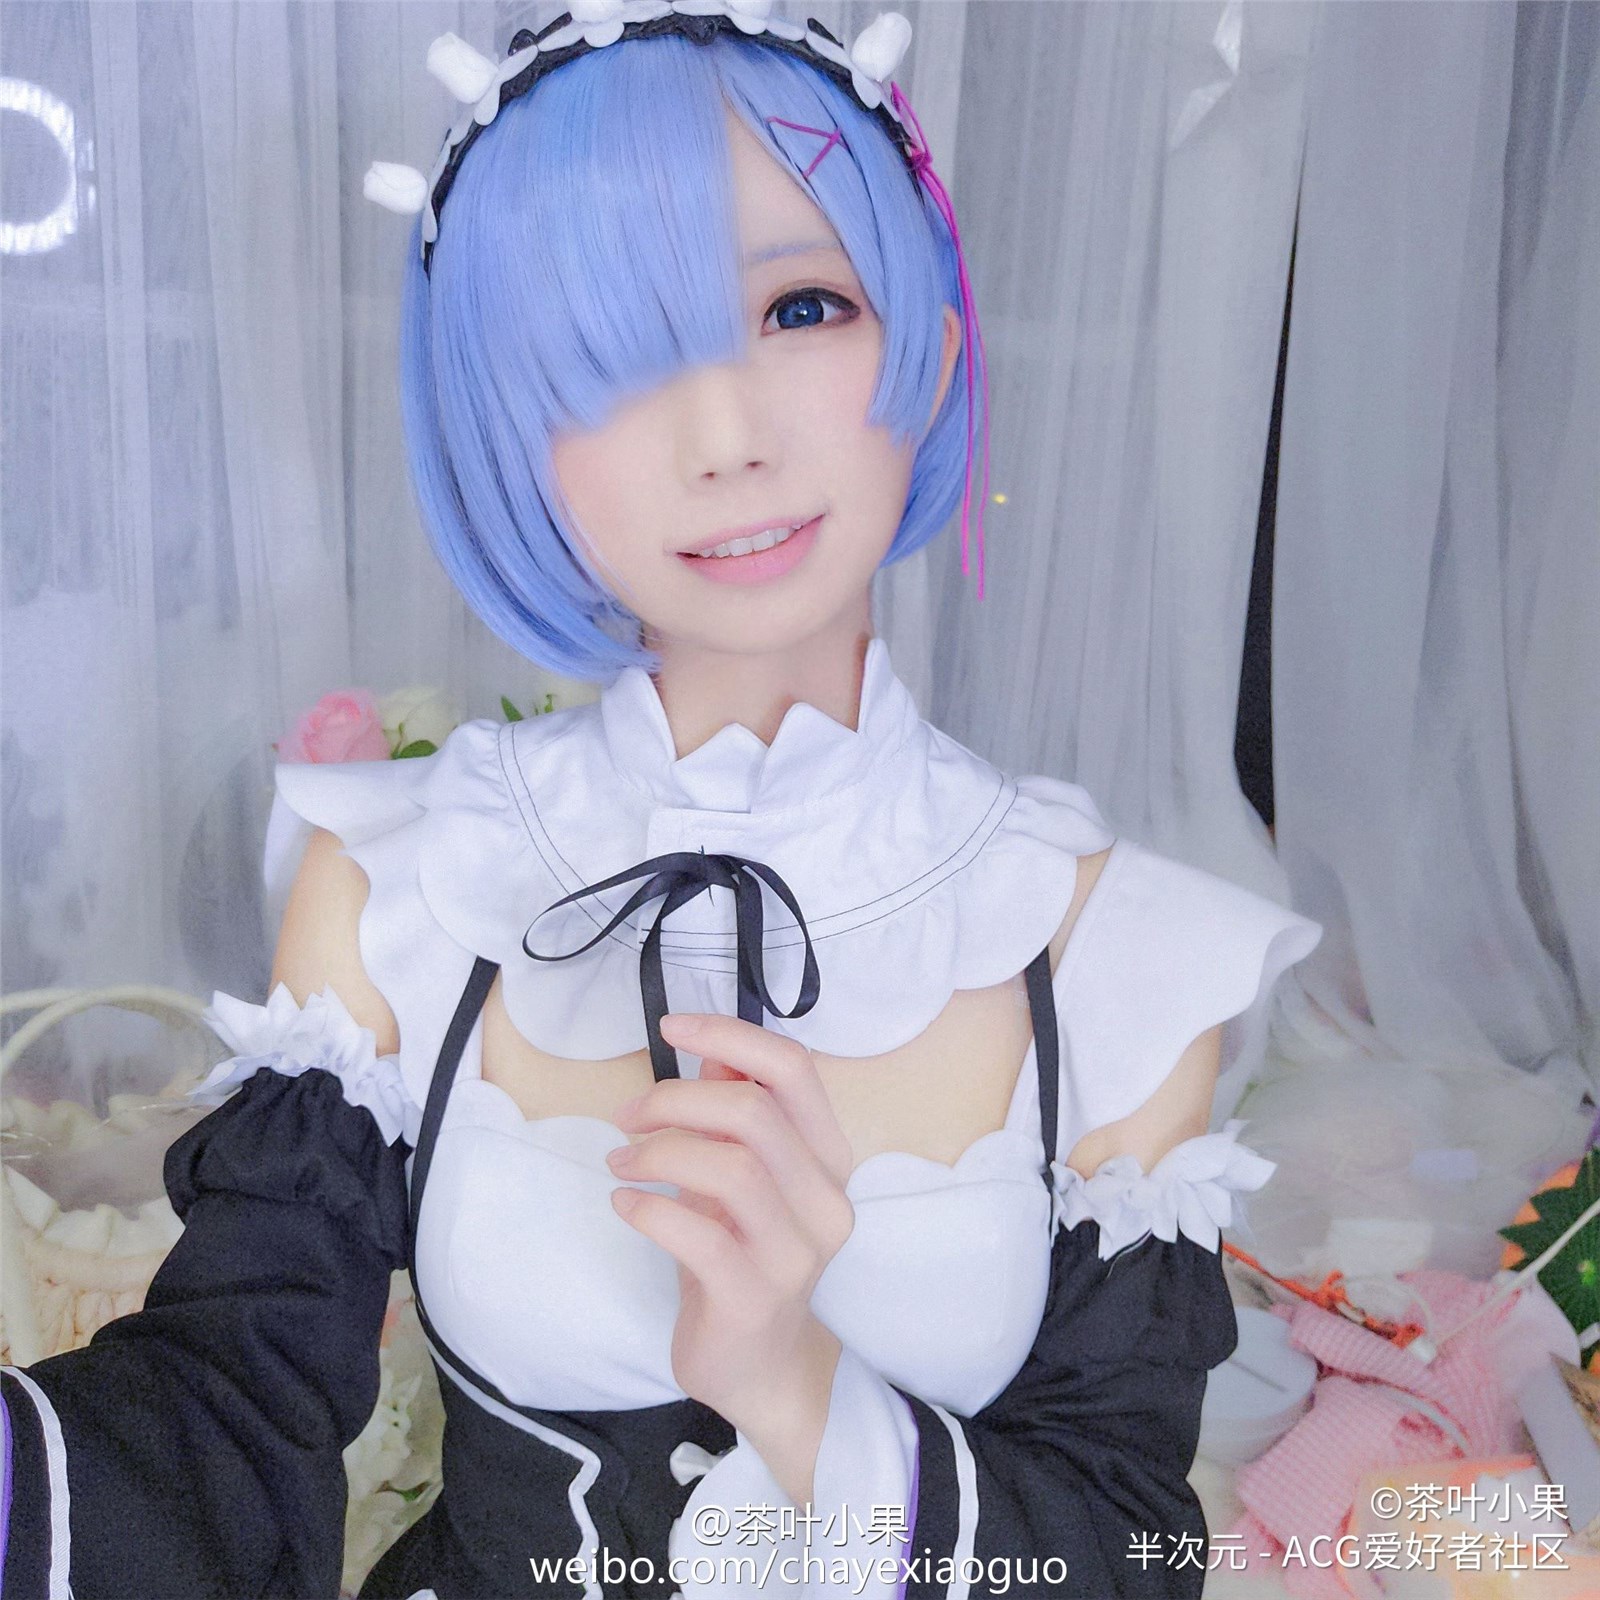 The most complete collection of remcos_ Maid 6(3)